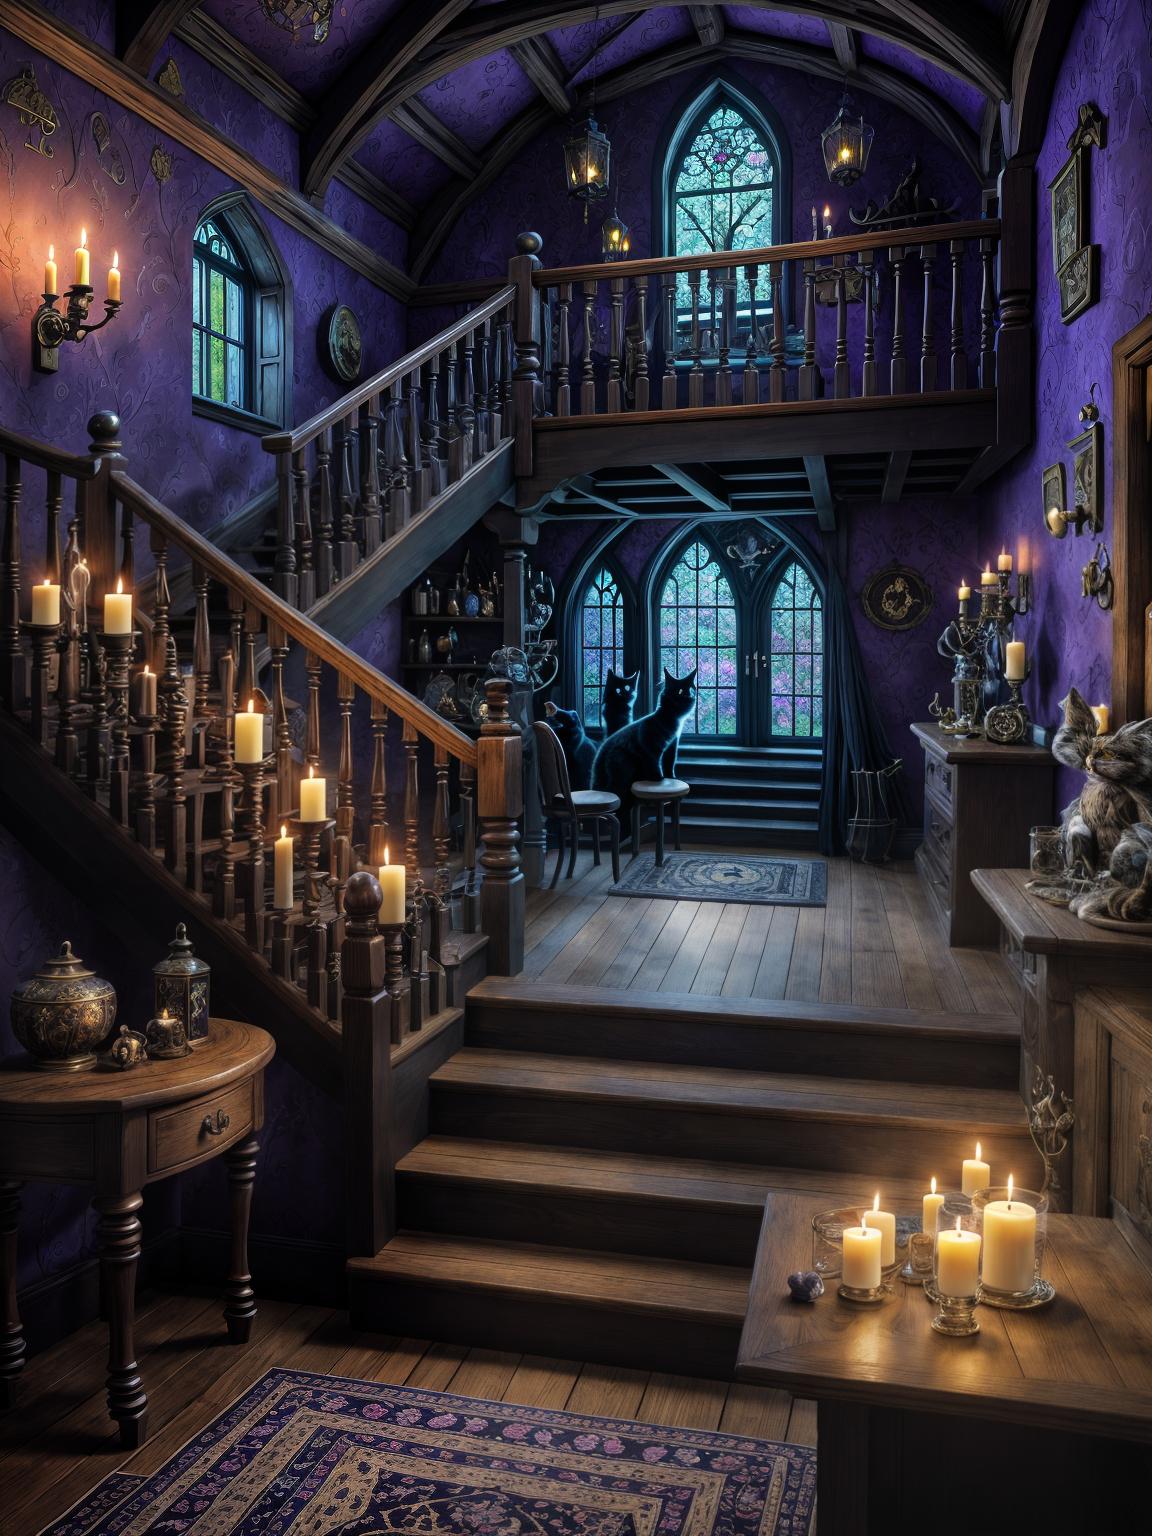  master piece, best quality, ultra detailed, highres, 4k.8k, Witch, Arranging potion bottles, Serious, BREAK Realistic interior, Purple walls, Wooden staircase with a black cat, Witch's room., Witch's room, Potion bottles, Broomstick, Spellbooks, Cauldron, BREAK Mysterious and enchanting, Soft candlelight, Faint magical aura, BoneyardAI